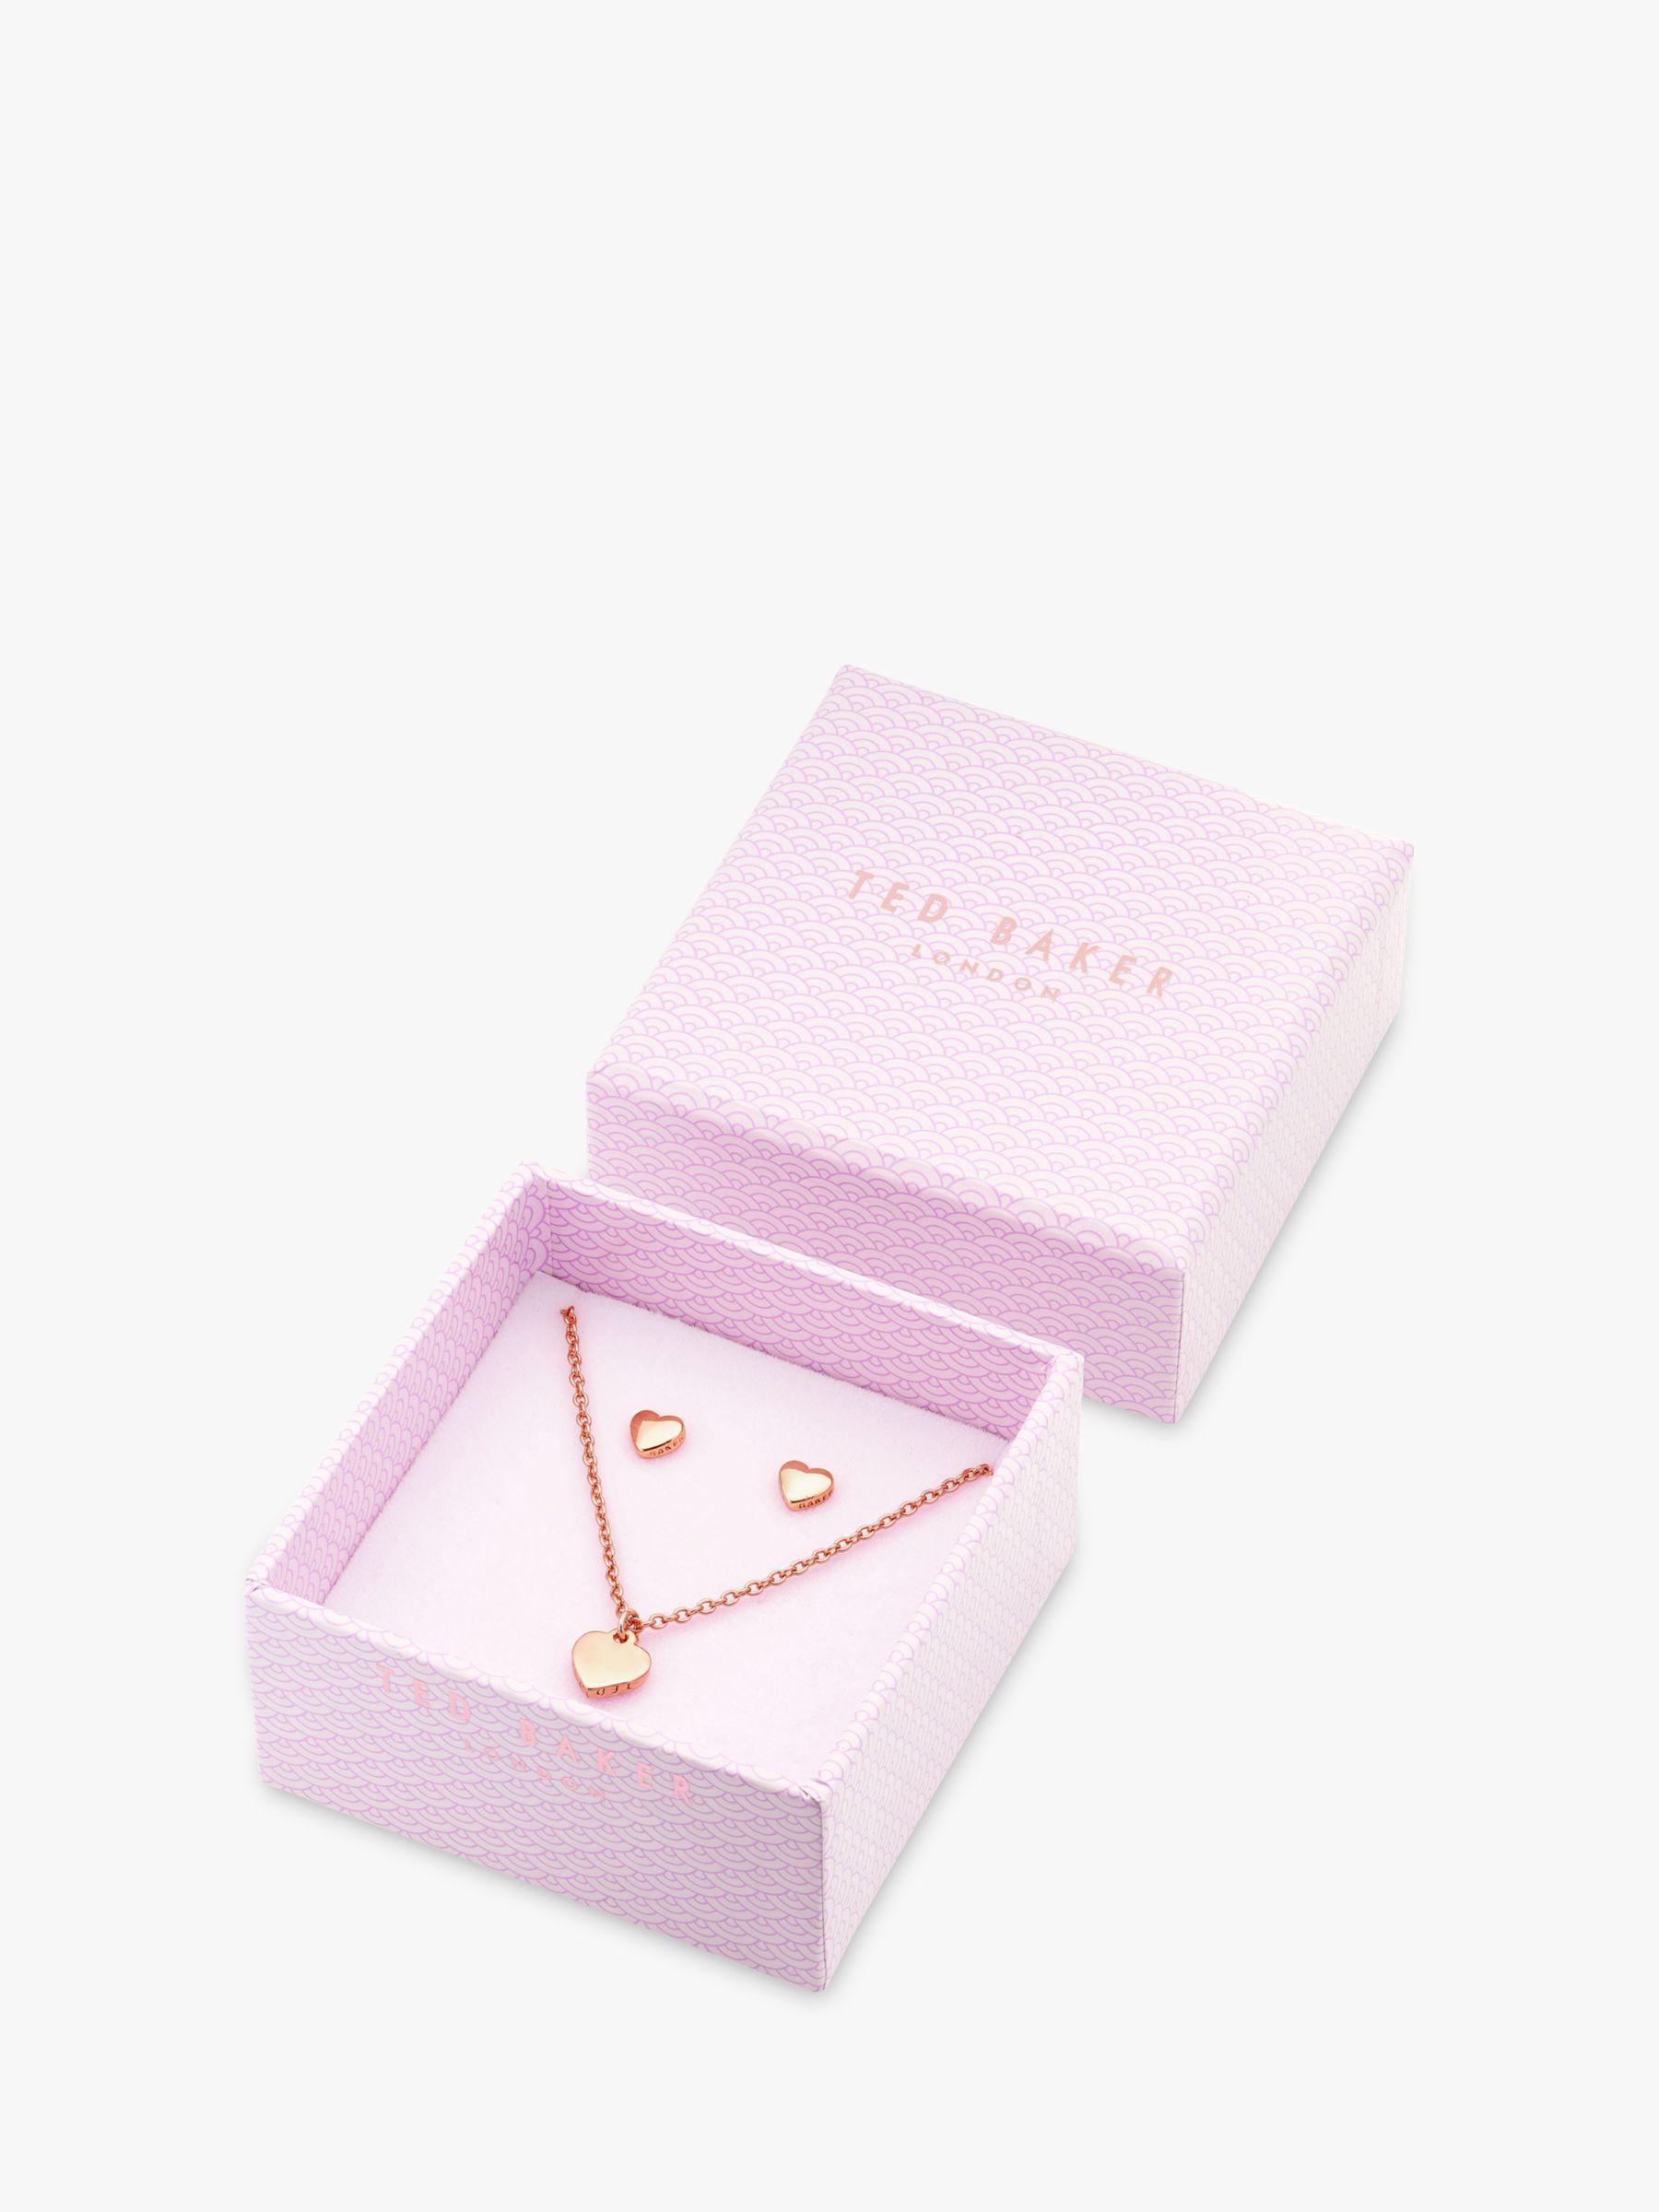 Ted Baker Hara & Harly Sweetheart Pendant Necklace and Stud Earrings Box Jewellery Set, Rose Gold